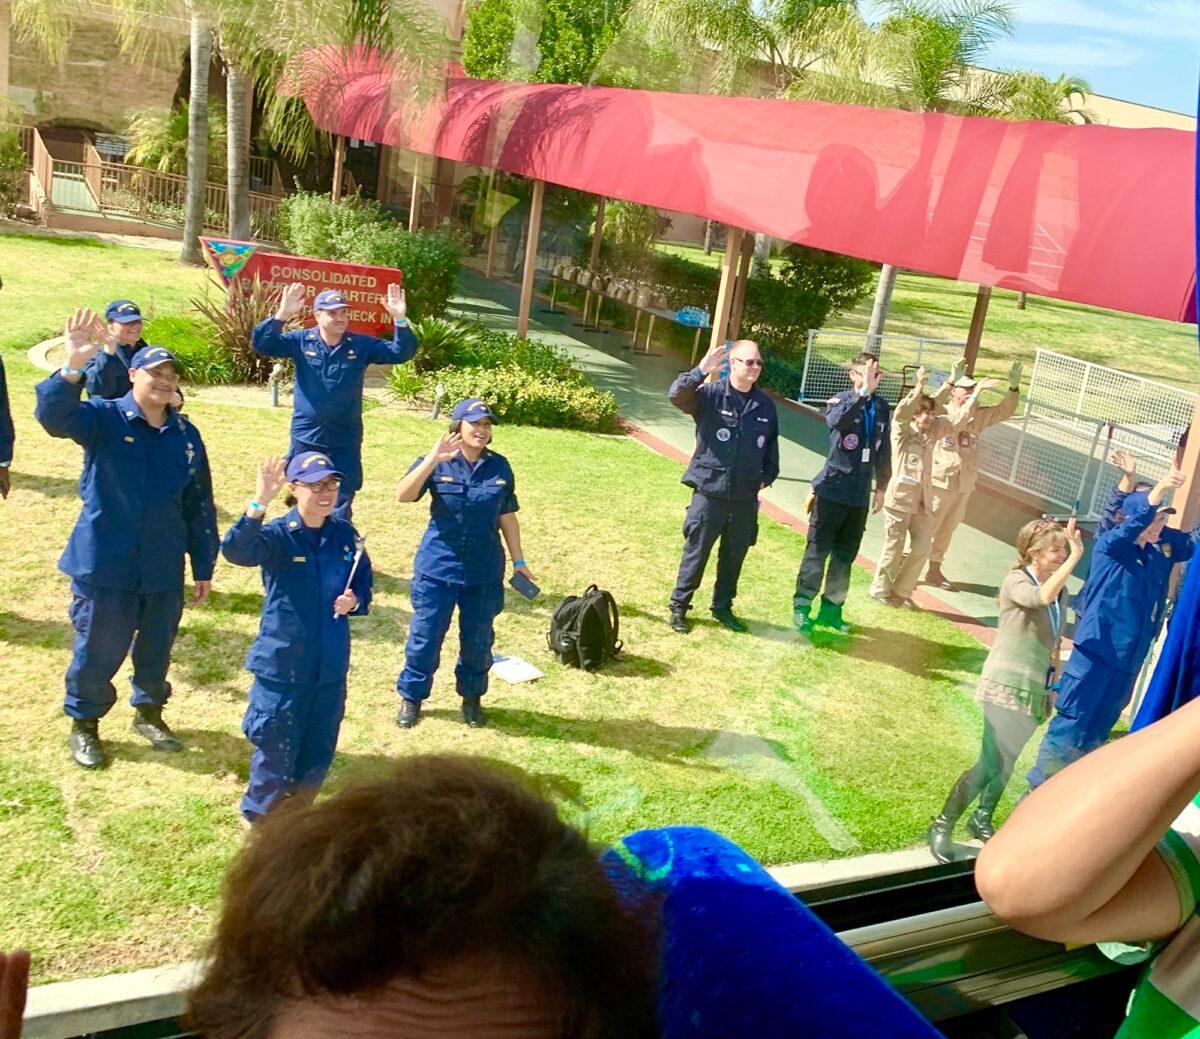 Working staff are waving their hands to the leaving quarantined passengers who were free of the coronavirus at the quarantine center that is located at Marine Corps Air Station in Miramar, California, on Feb. 18, 2020. (Provided to The Epoch Times by David)